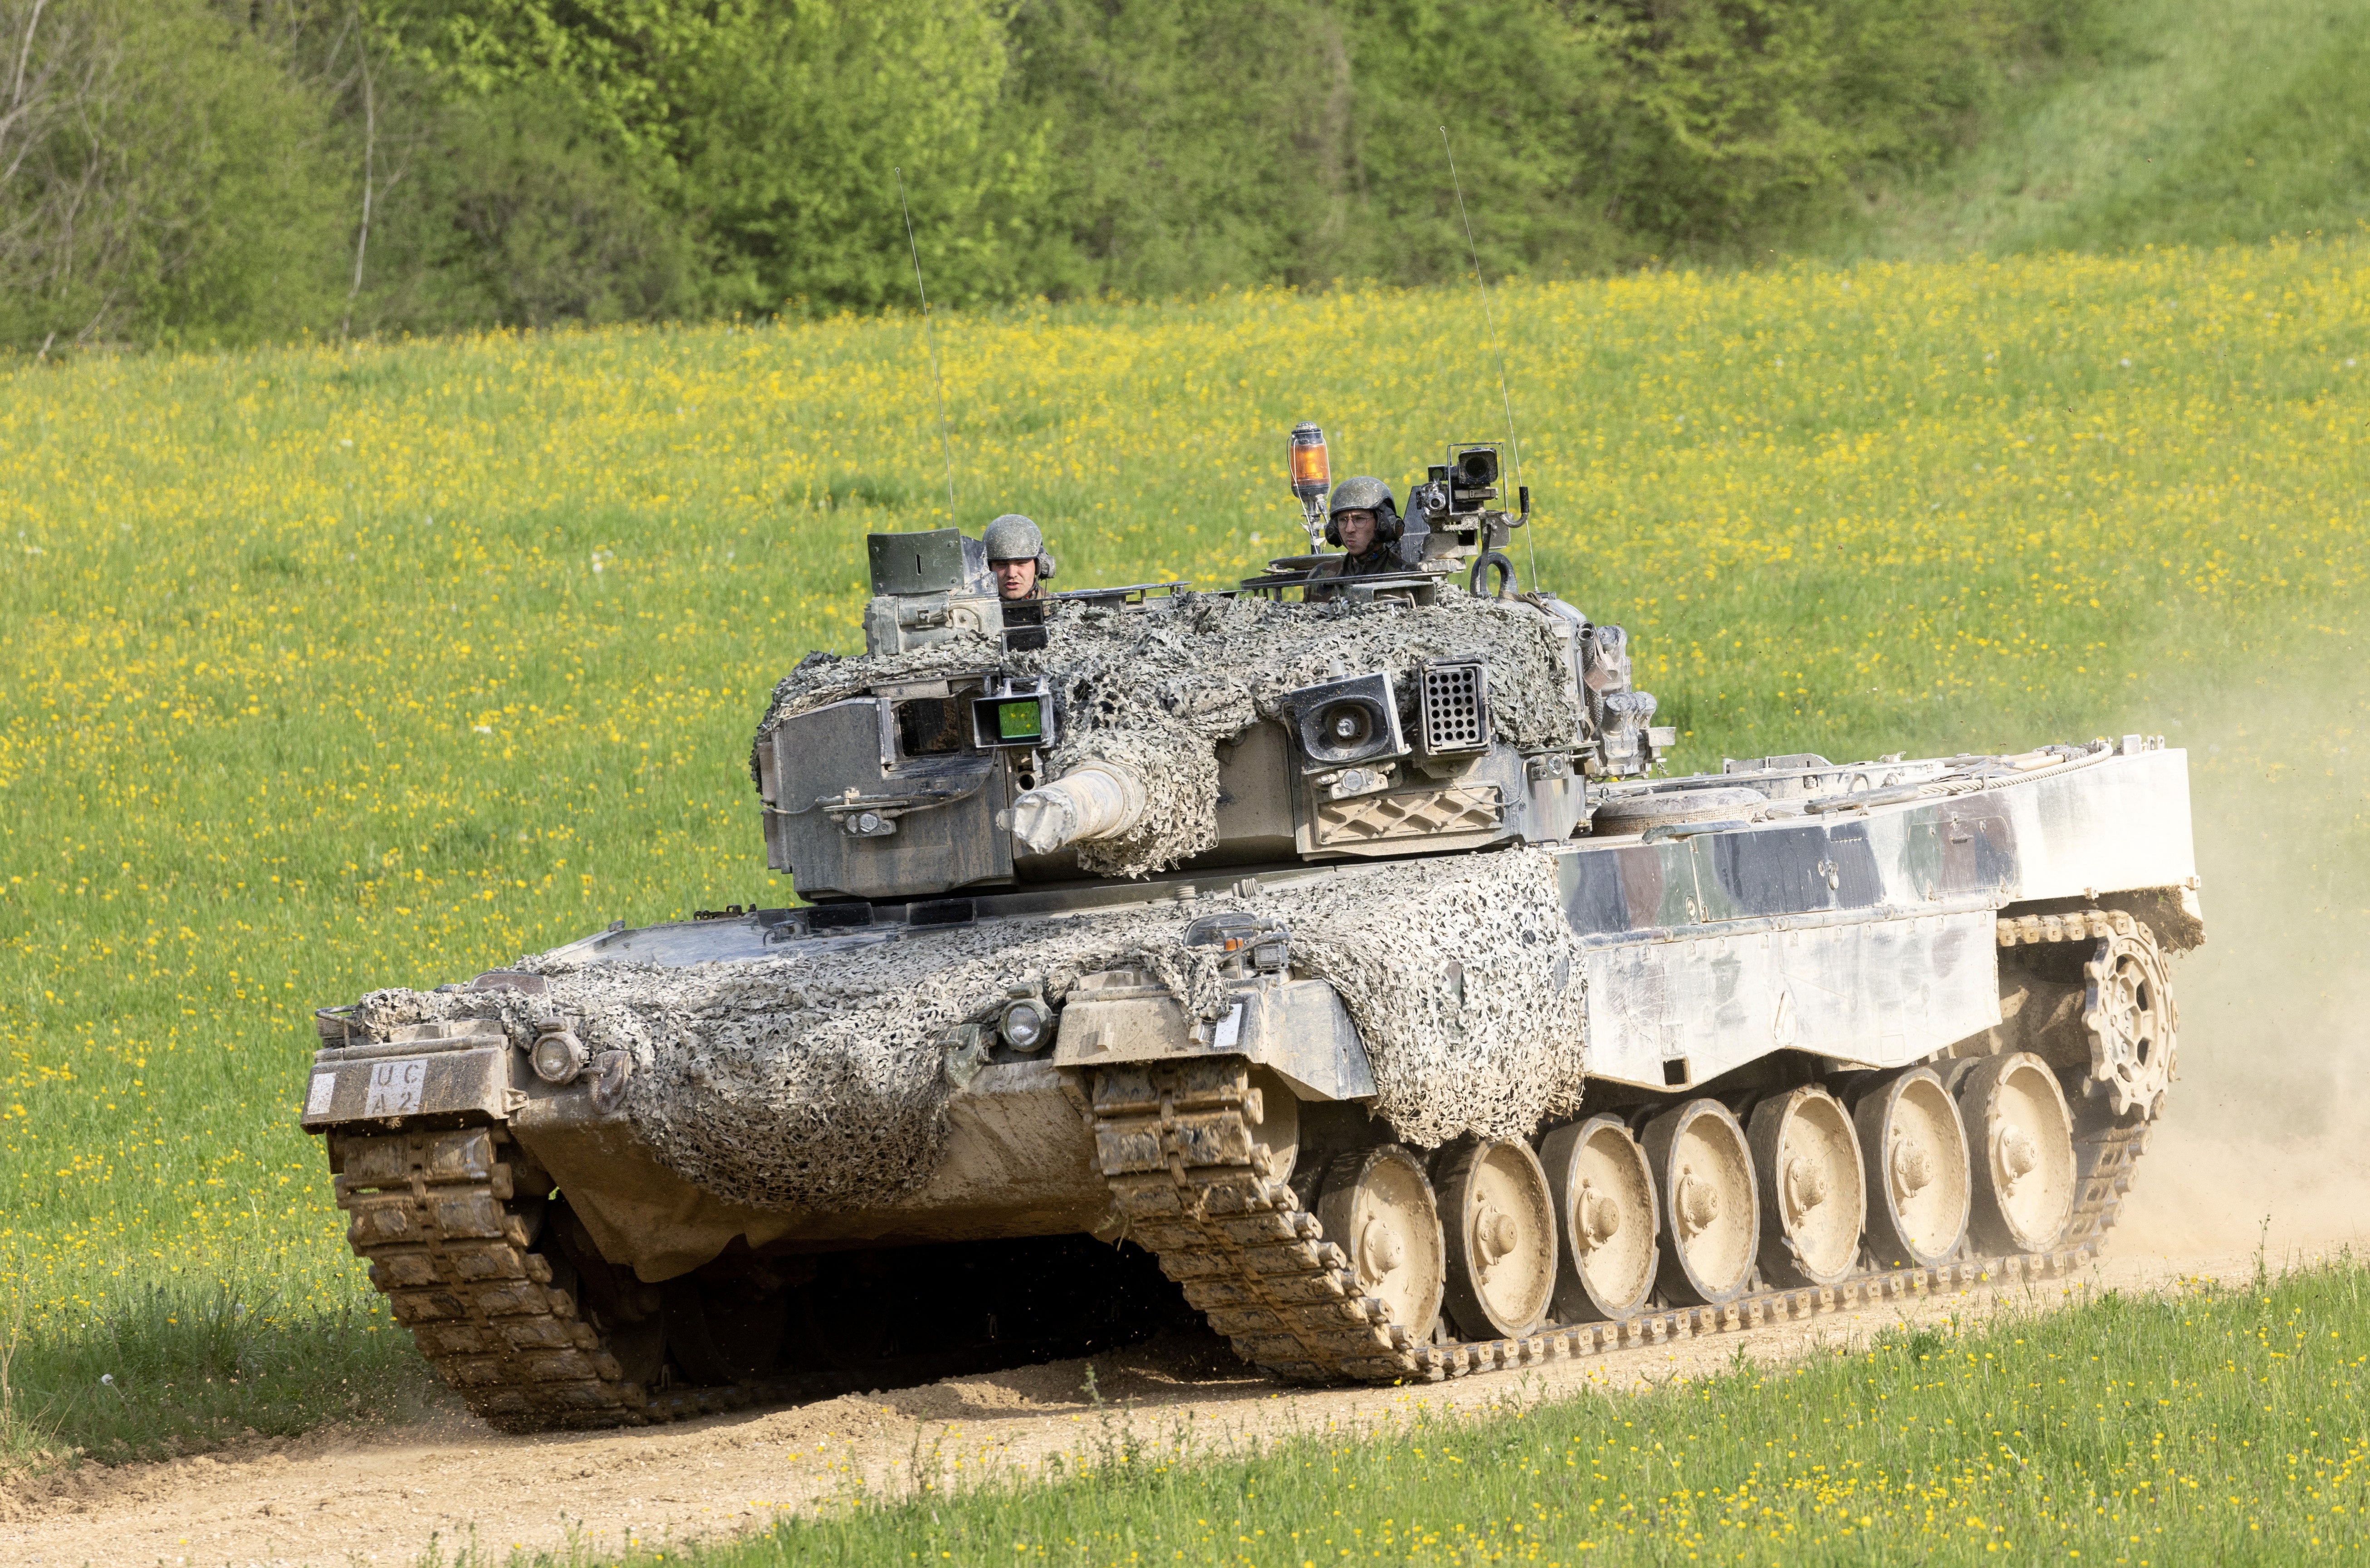 Recruits of the Swiss army Tank School 21 perform an attack exercise with the Leopard 2 tank